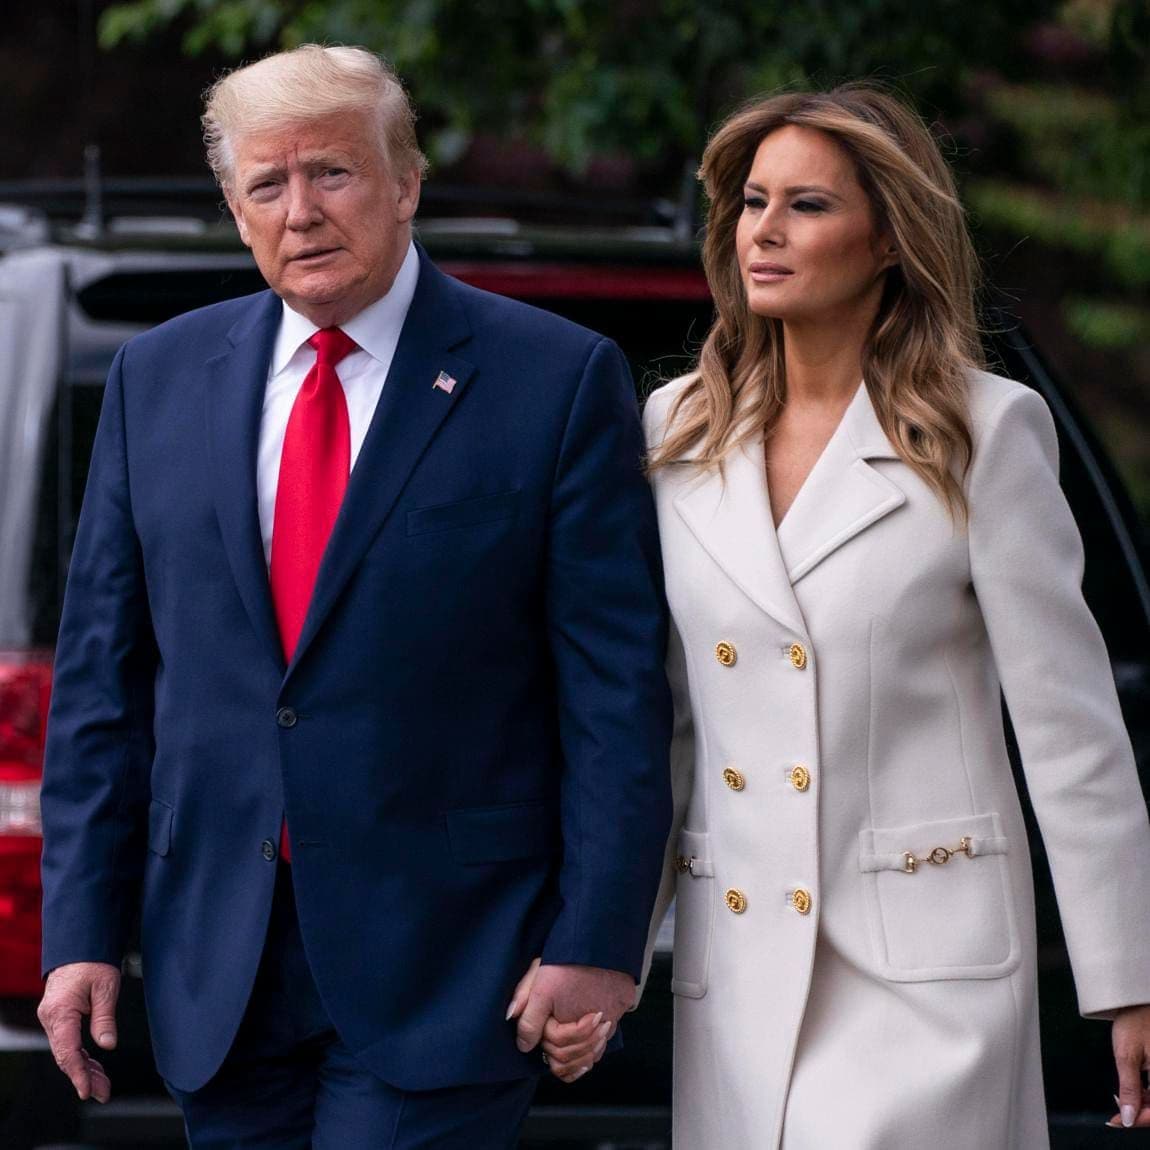 The first lady and president both tested positive for COVID 19